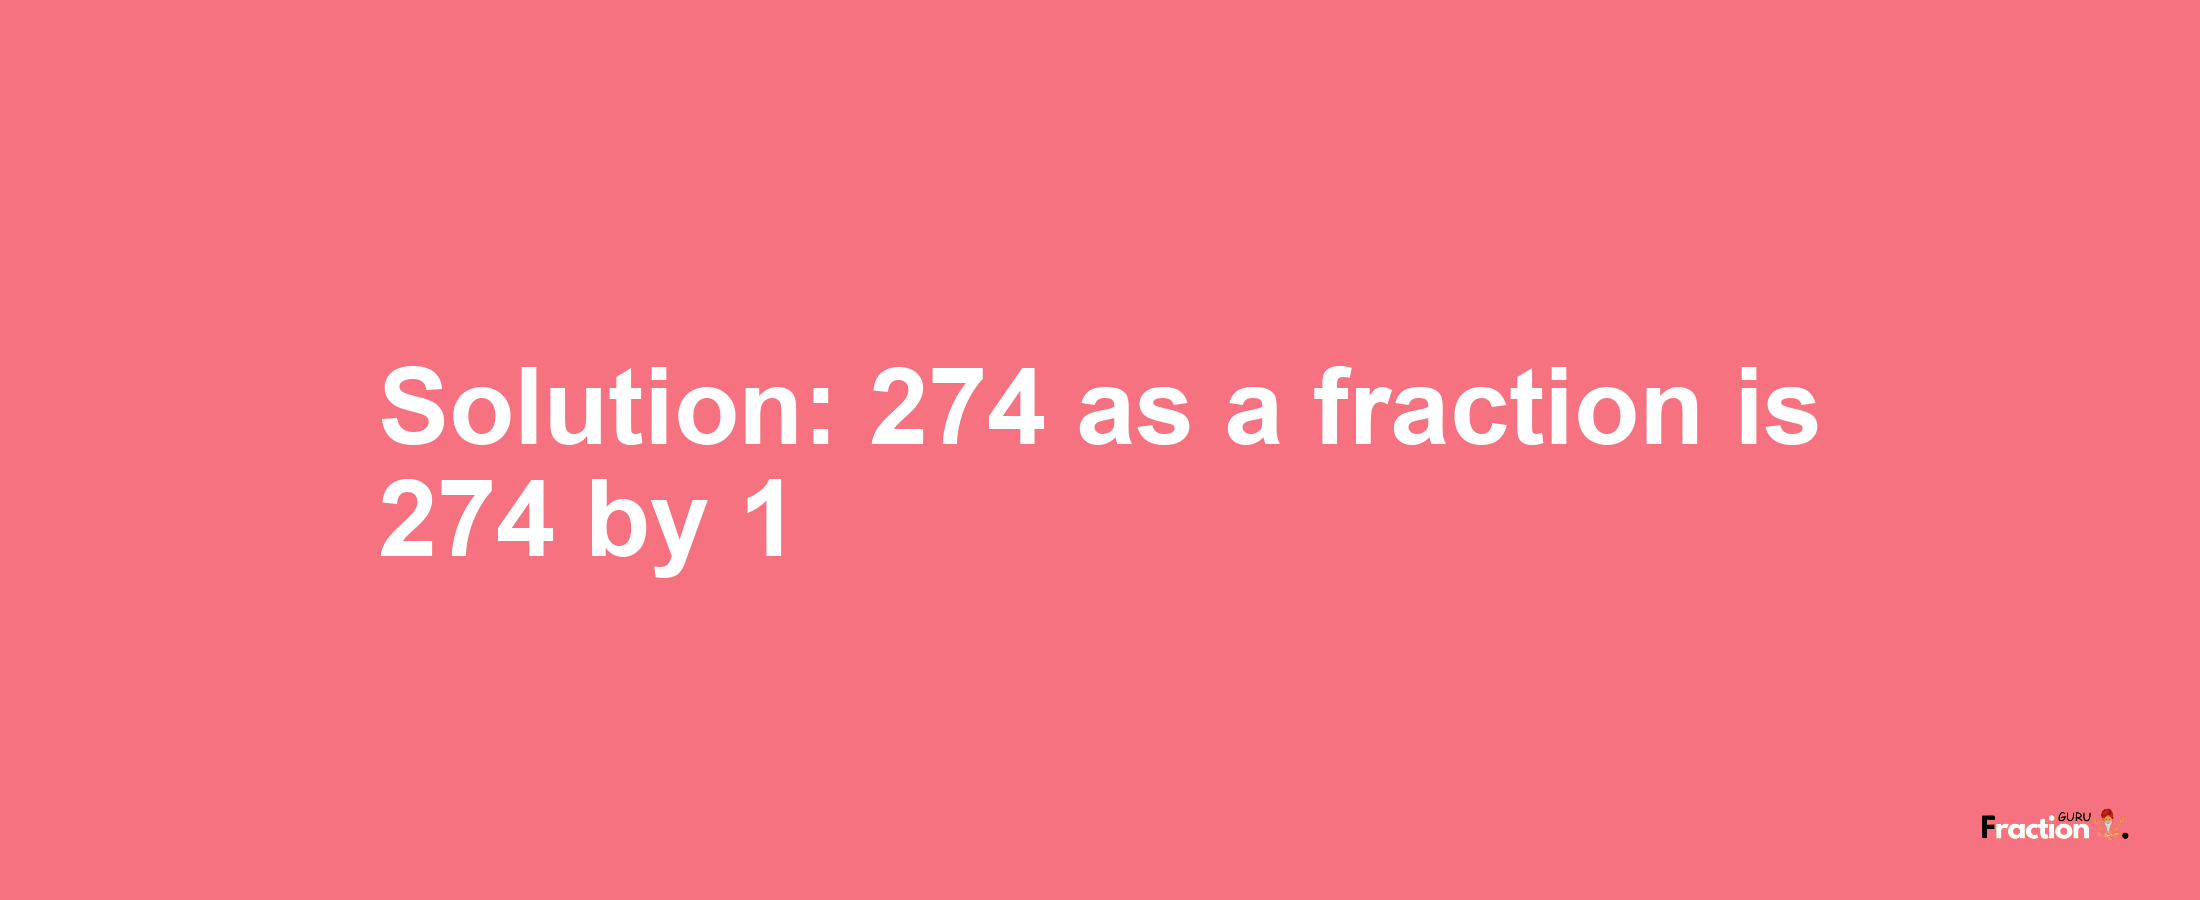 Solution:274 as a fraction is 274/1